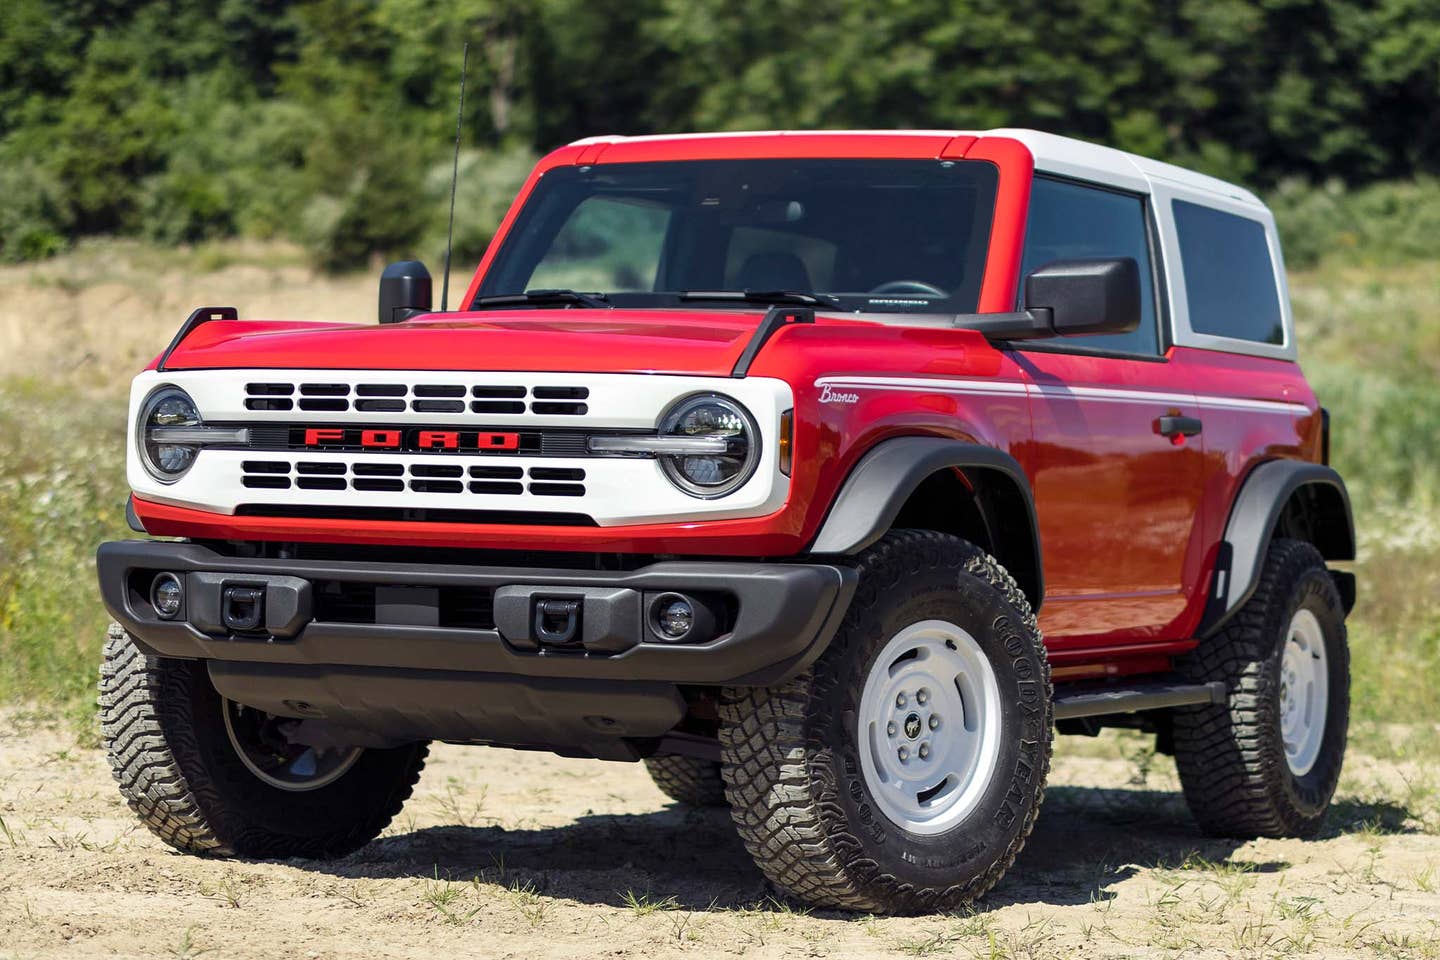 2023 Ford Bronco Heritage Editions Get Retro White Roof, 35-Inch Tires